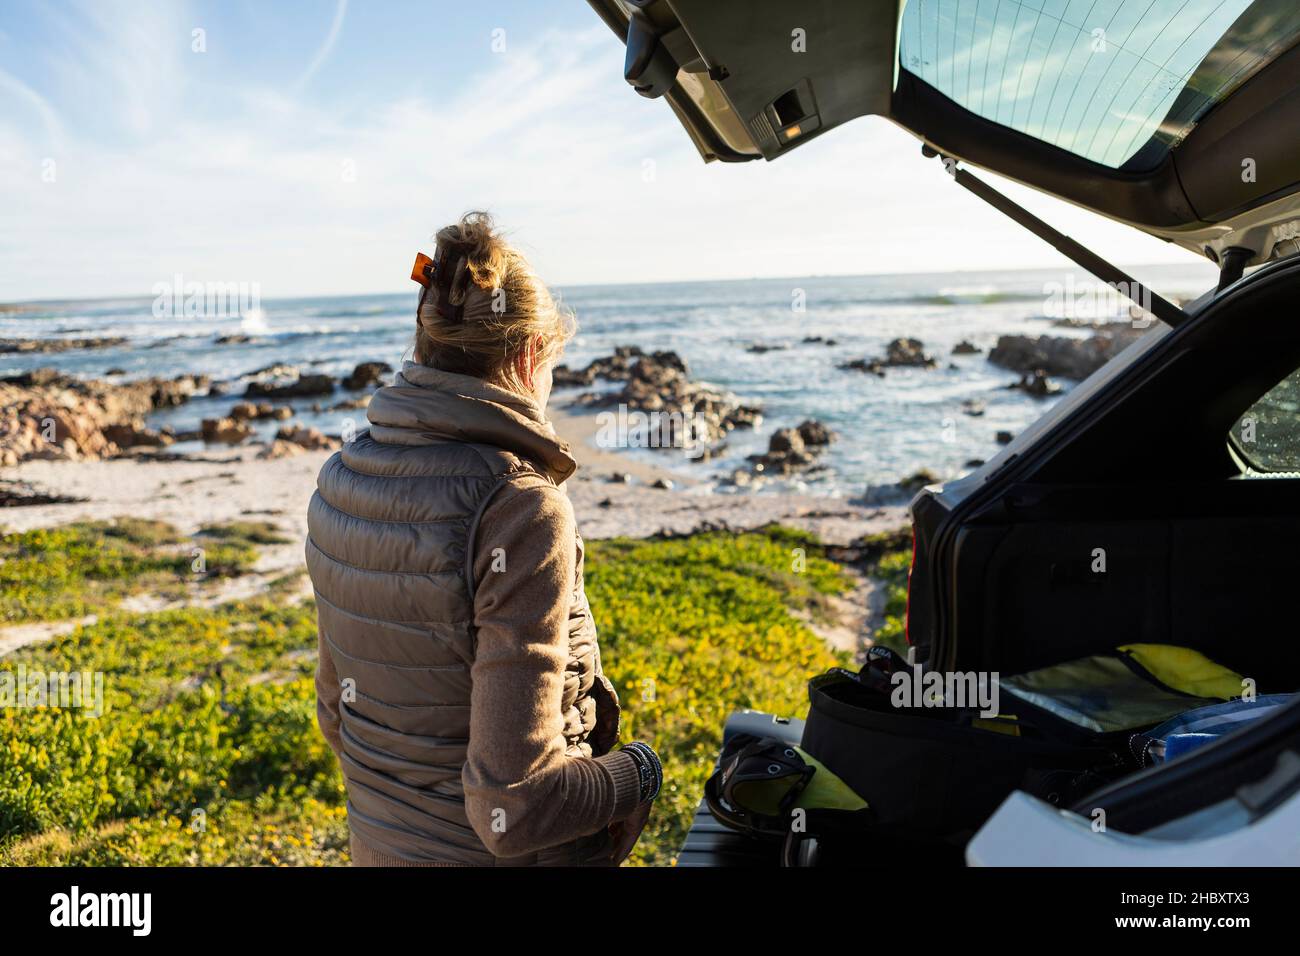 Adult woman by the open door of a vehicle at the beach getting ready for hiking. Stock Photo